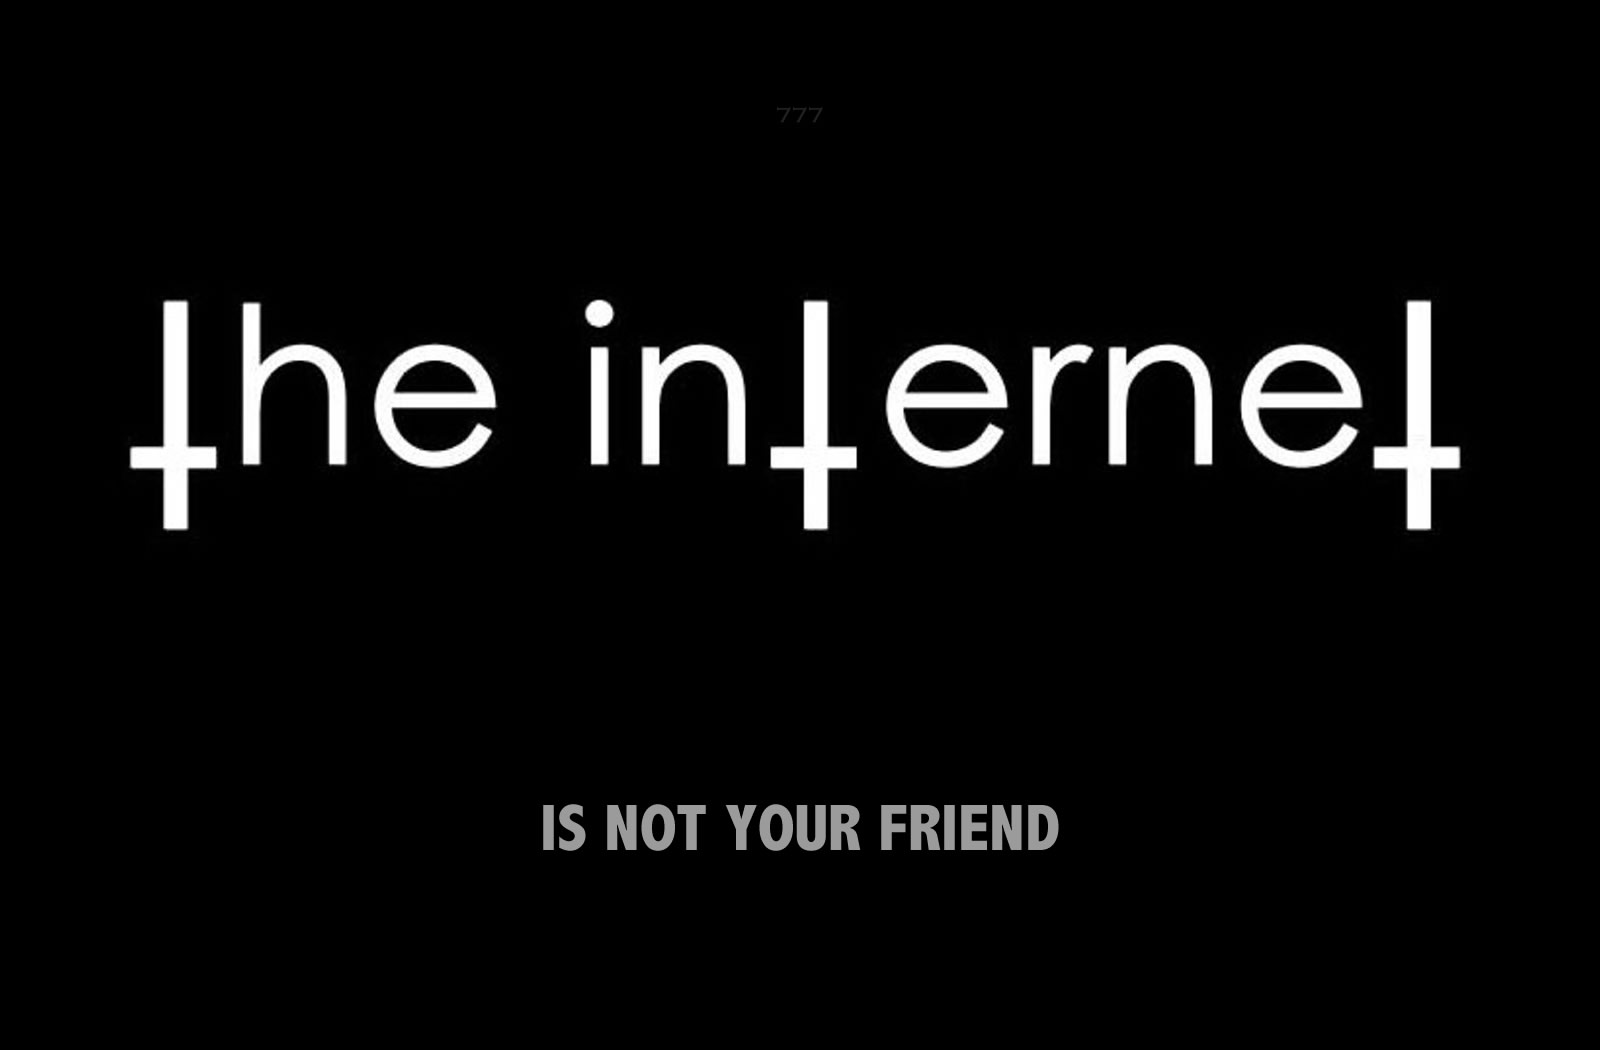 The Internet is NOT your friend